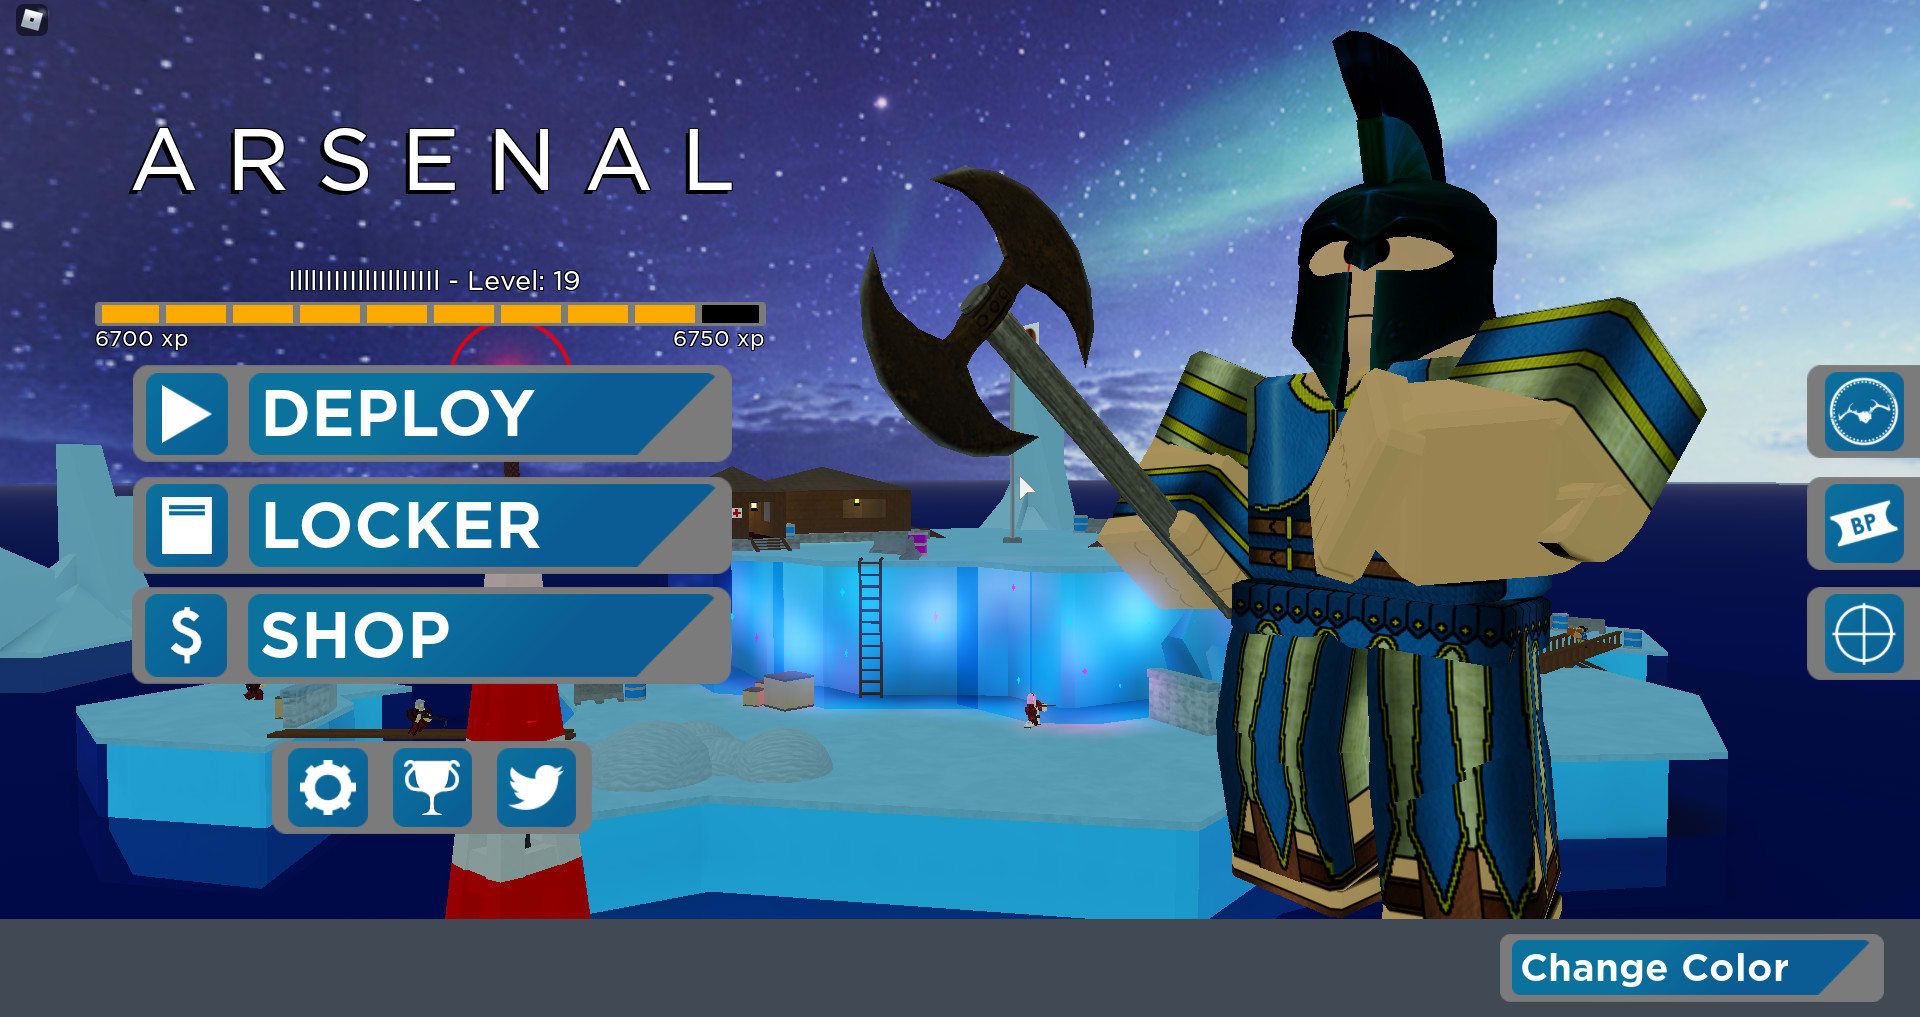 Boost Your Roblox Arsenal Account By Smilodon Gaming Fiverr - roblox pro accounts